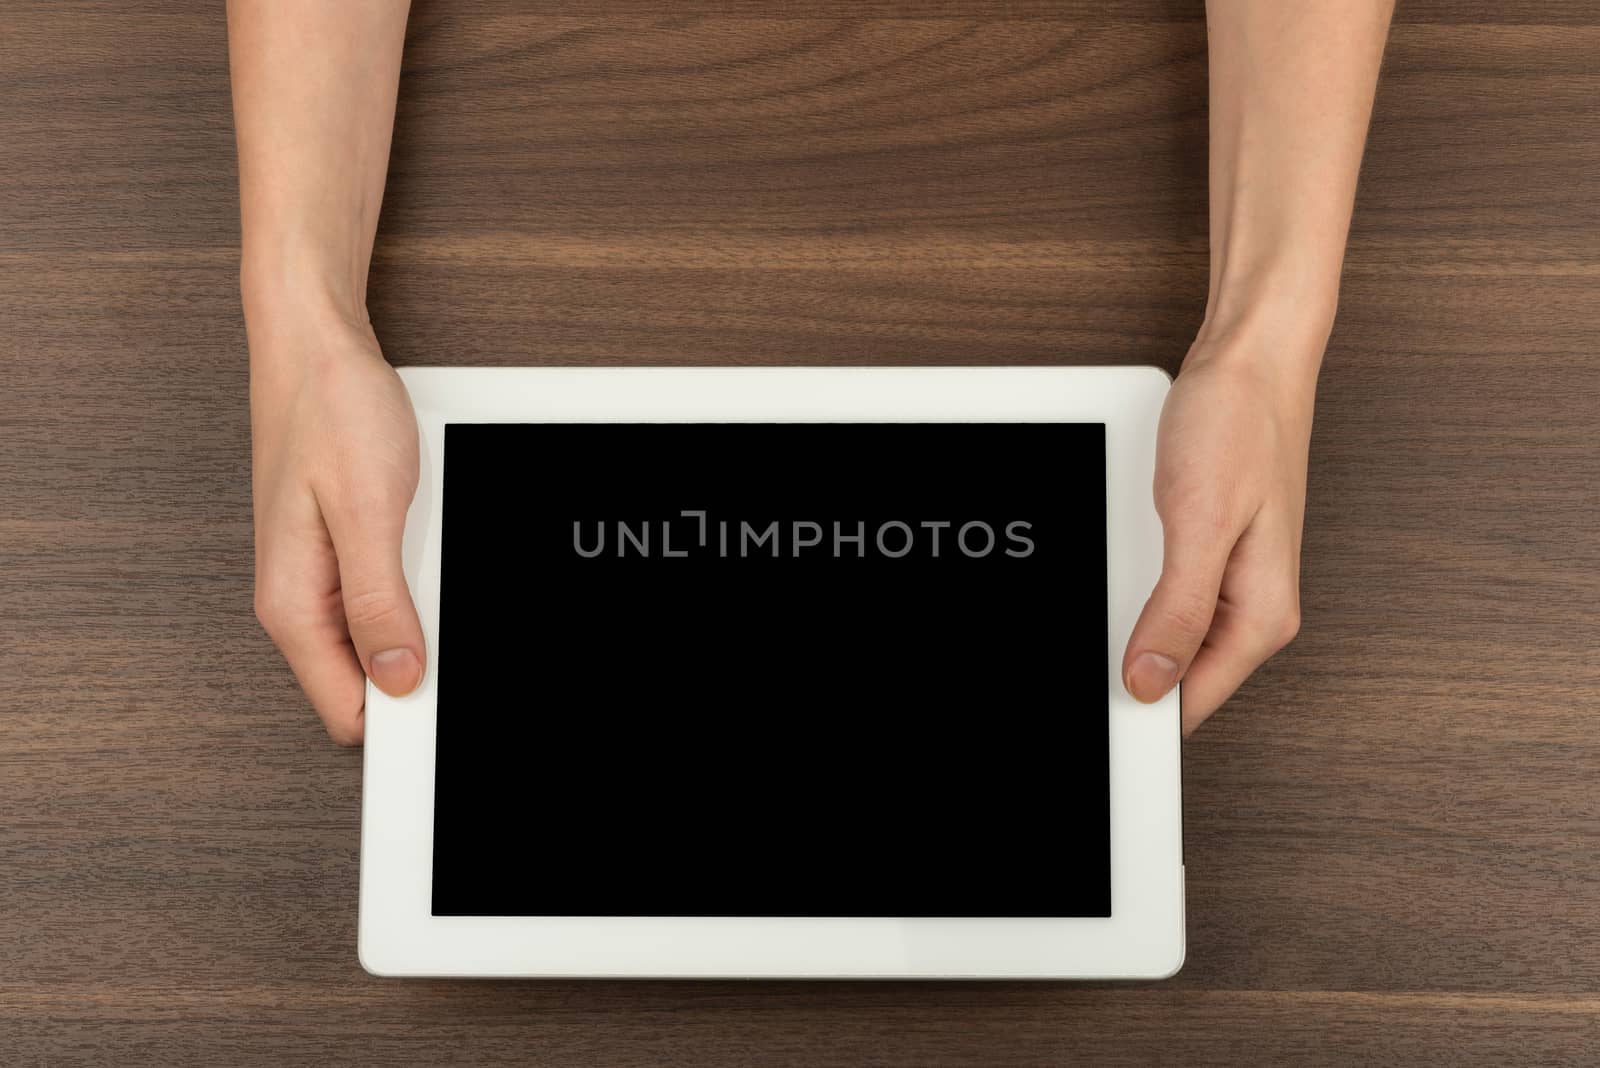 Humans hands holding white tablet by cherezoff